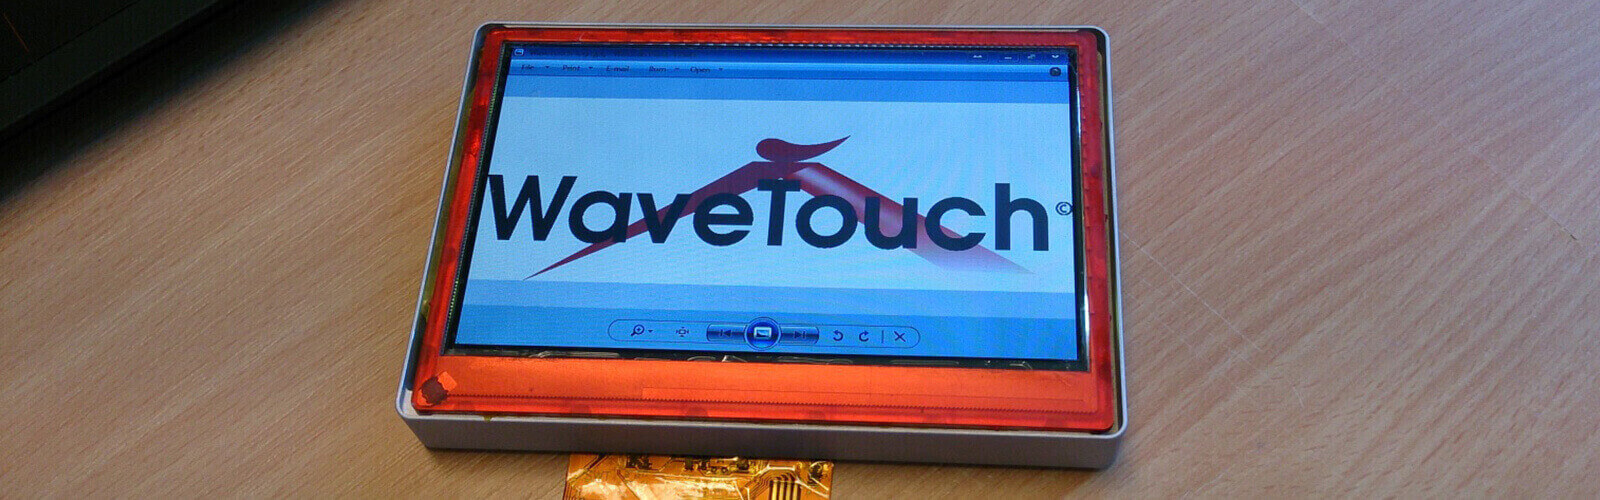 Wavetouch (2007-2012)